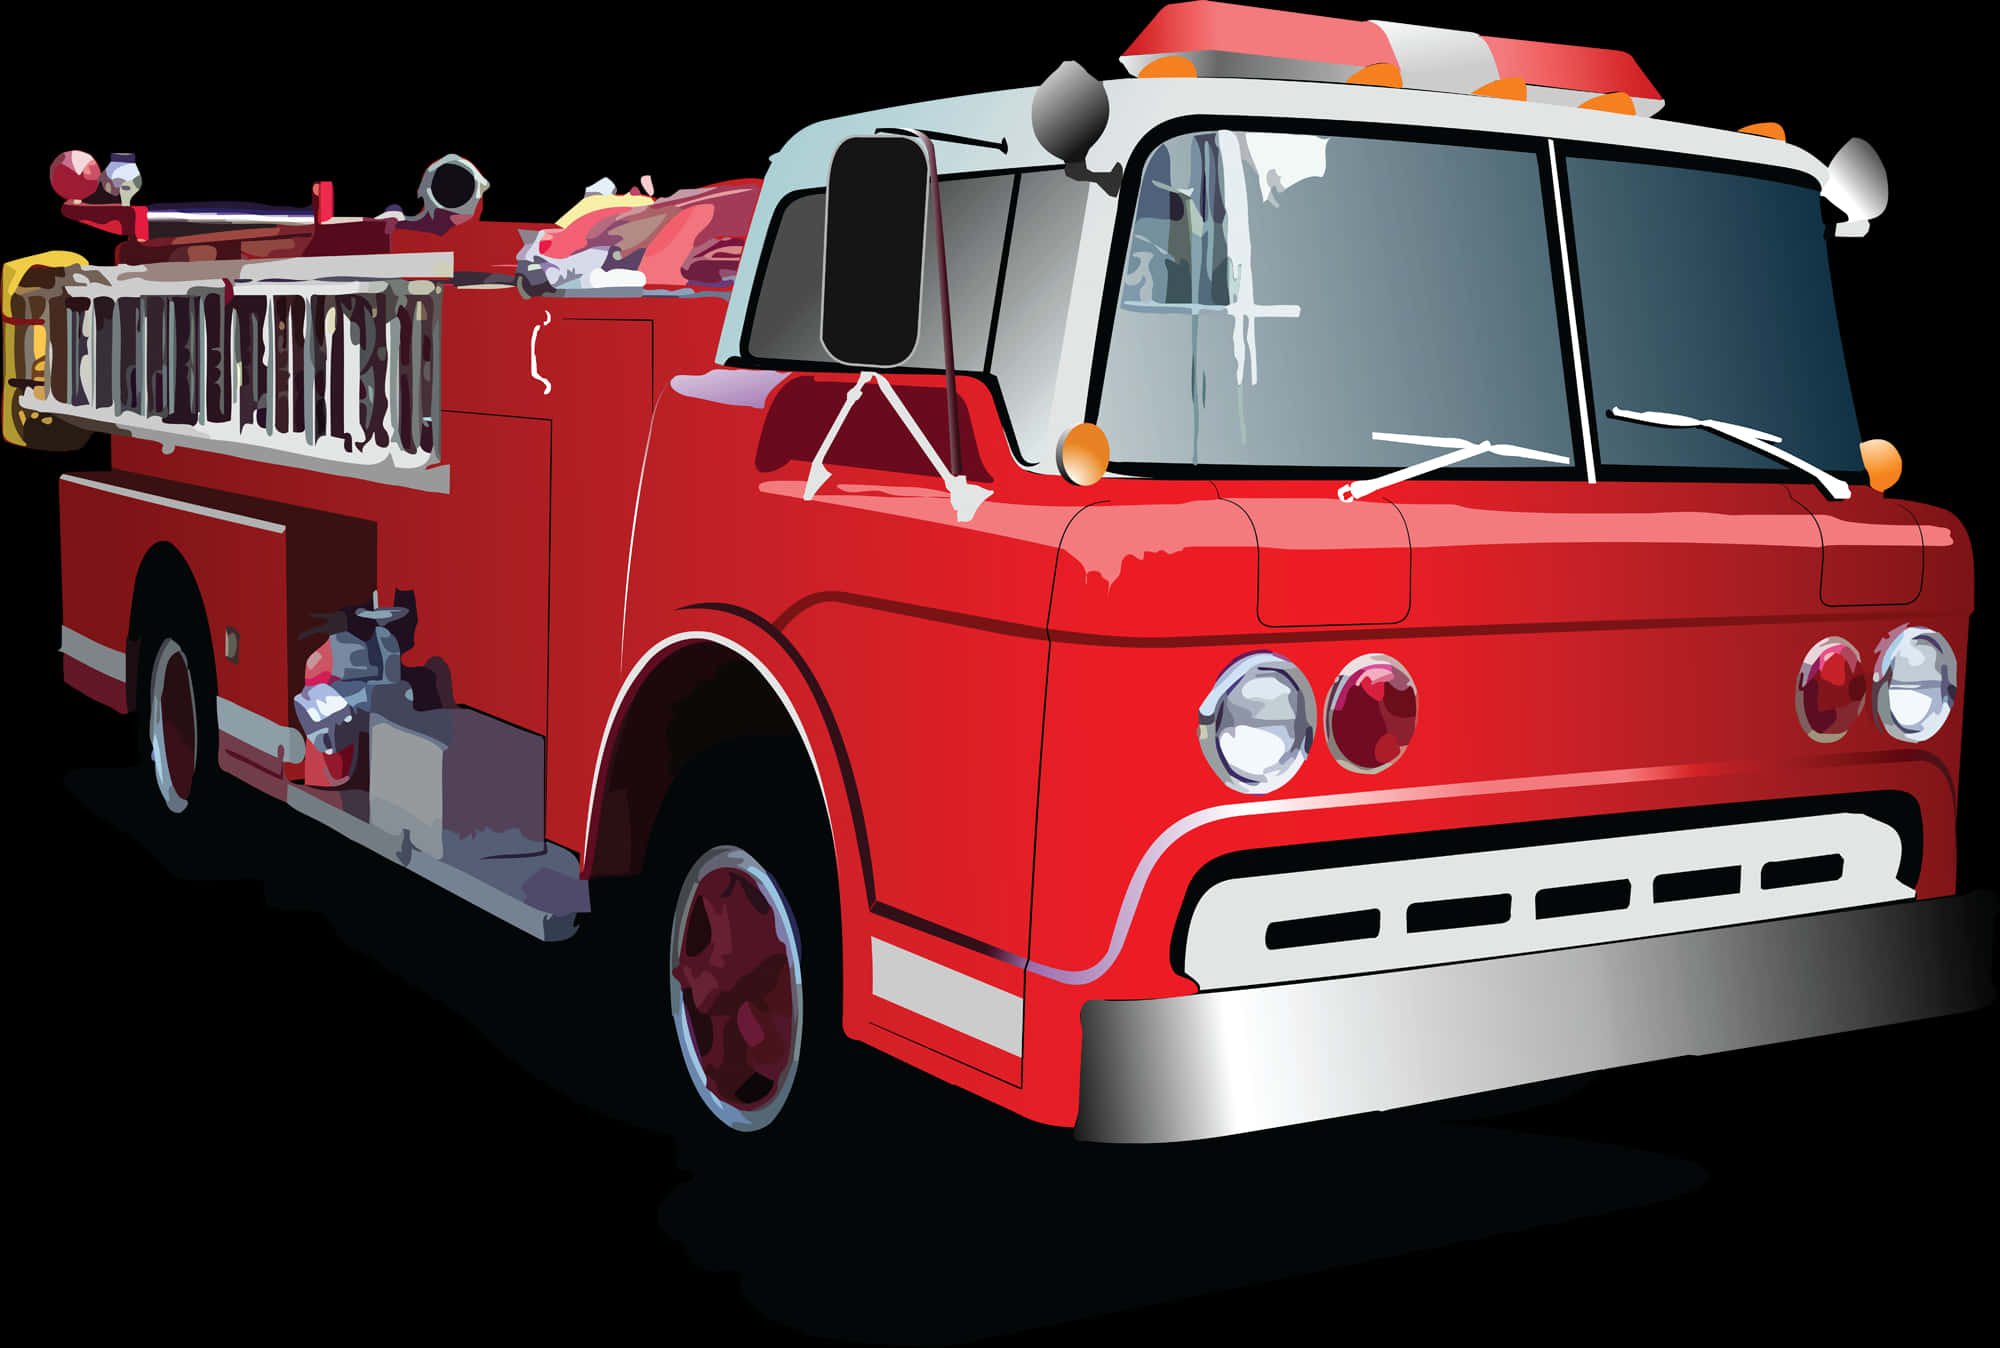 A Red Fire Truck With White Stripes